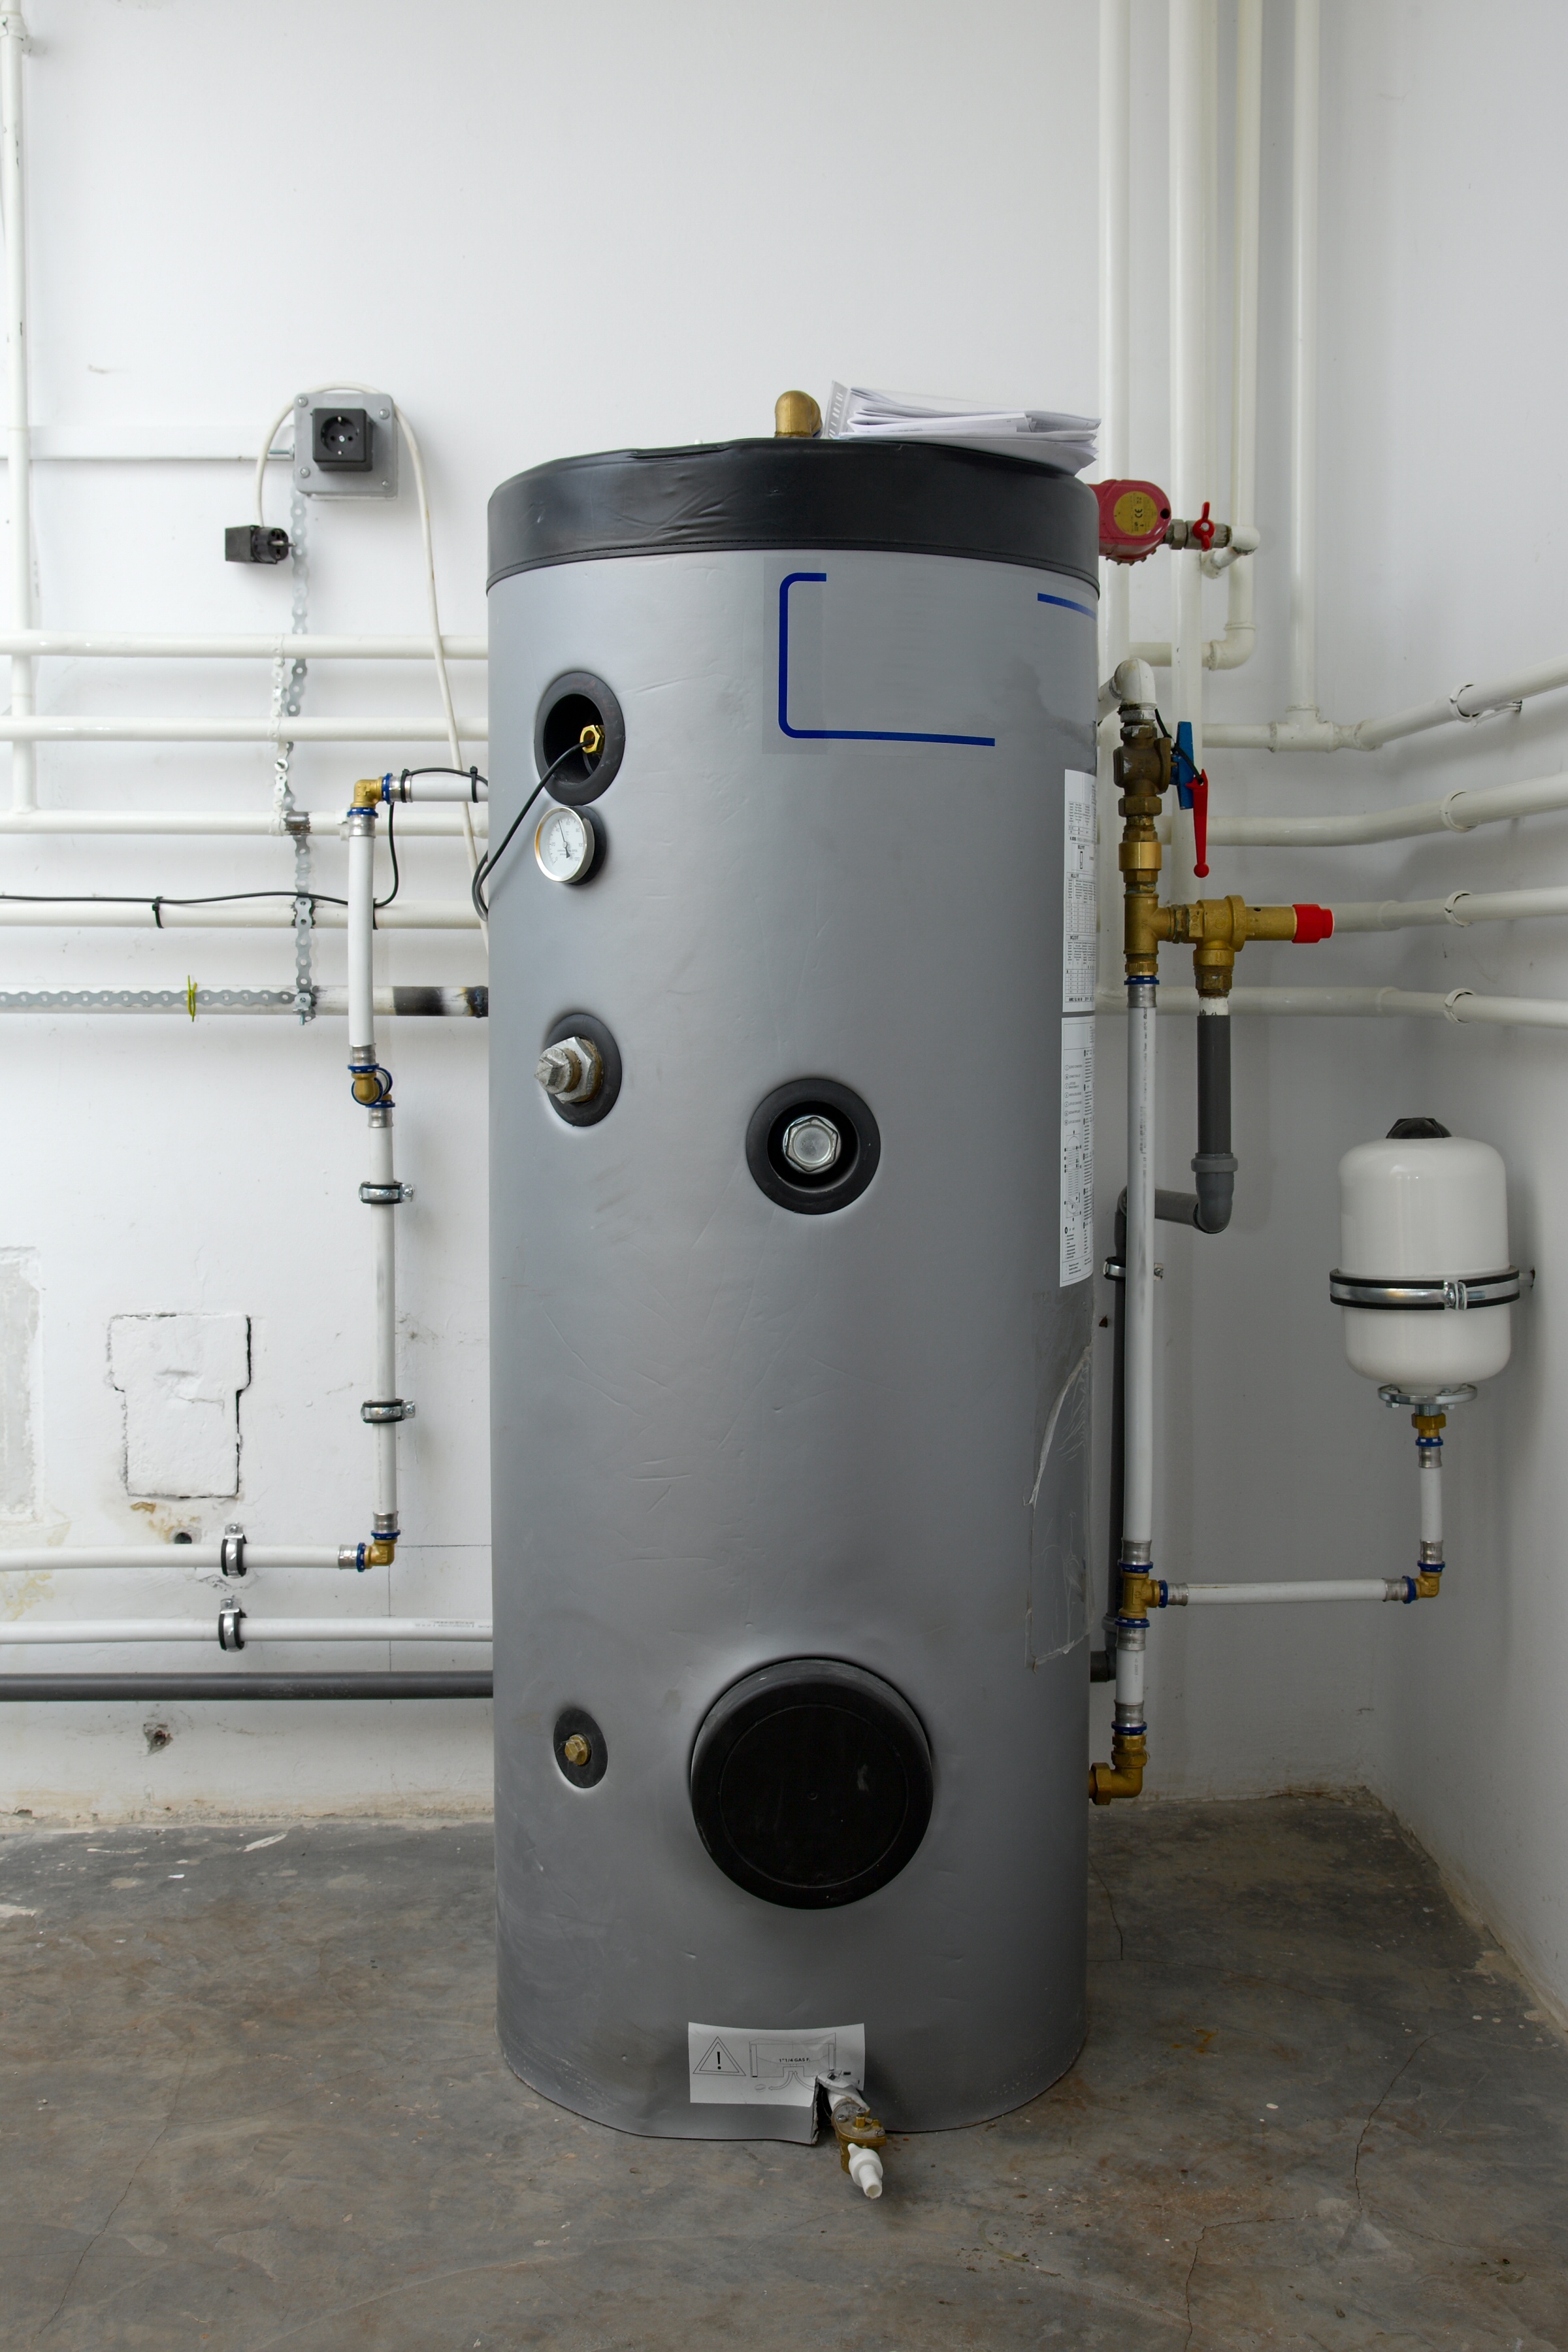 What are the benefits of boilers for my home?